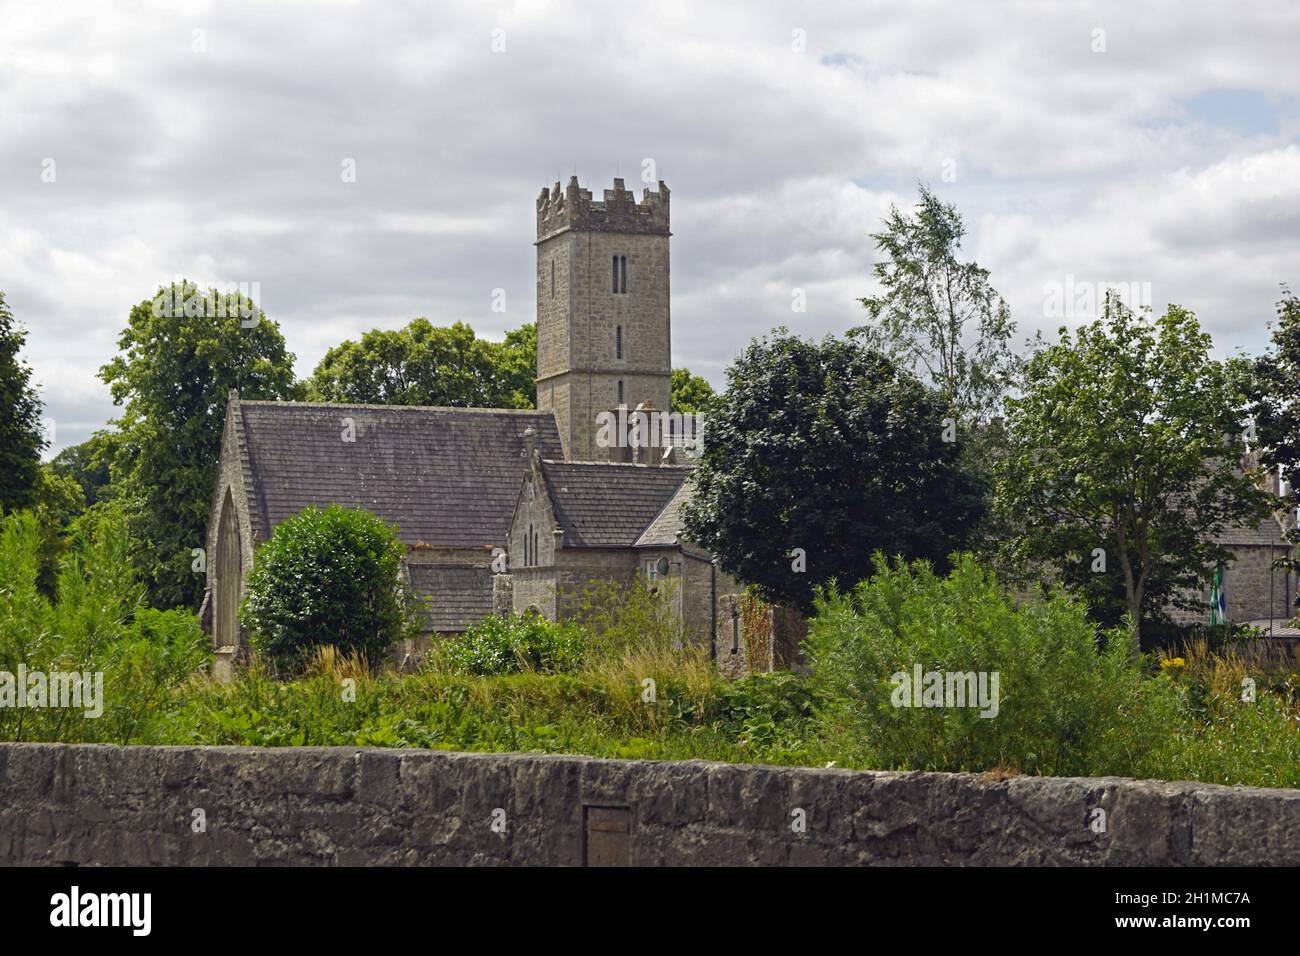 The Adare Friary, located in Adare, County Limerick, Ireland, formerly known as the 'Black Abbey', is an Augustinian Friary founded in 1316 by the Ear Stock Photo